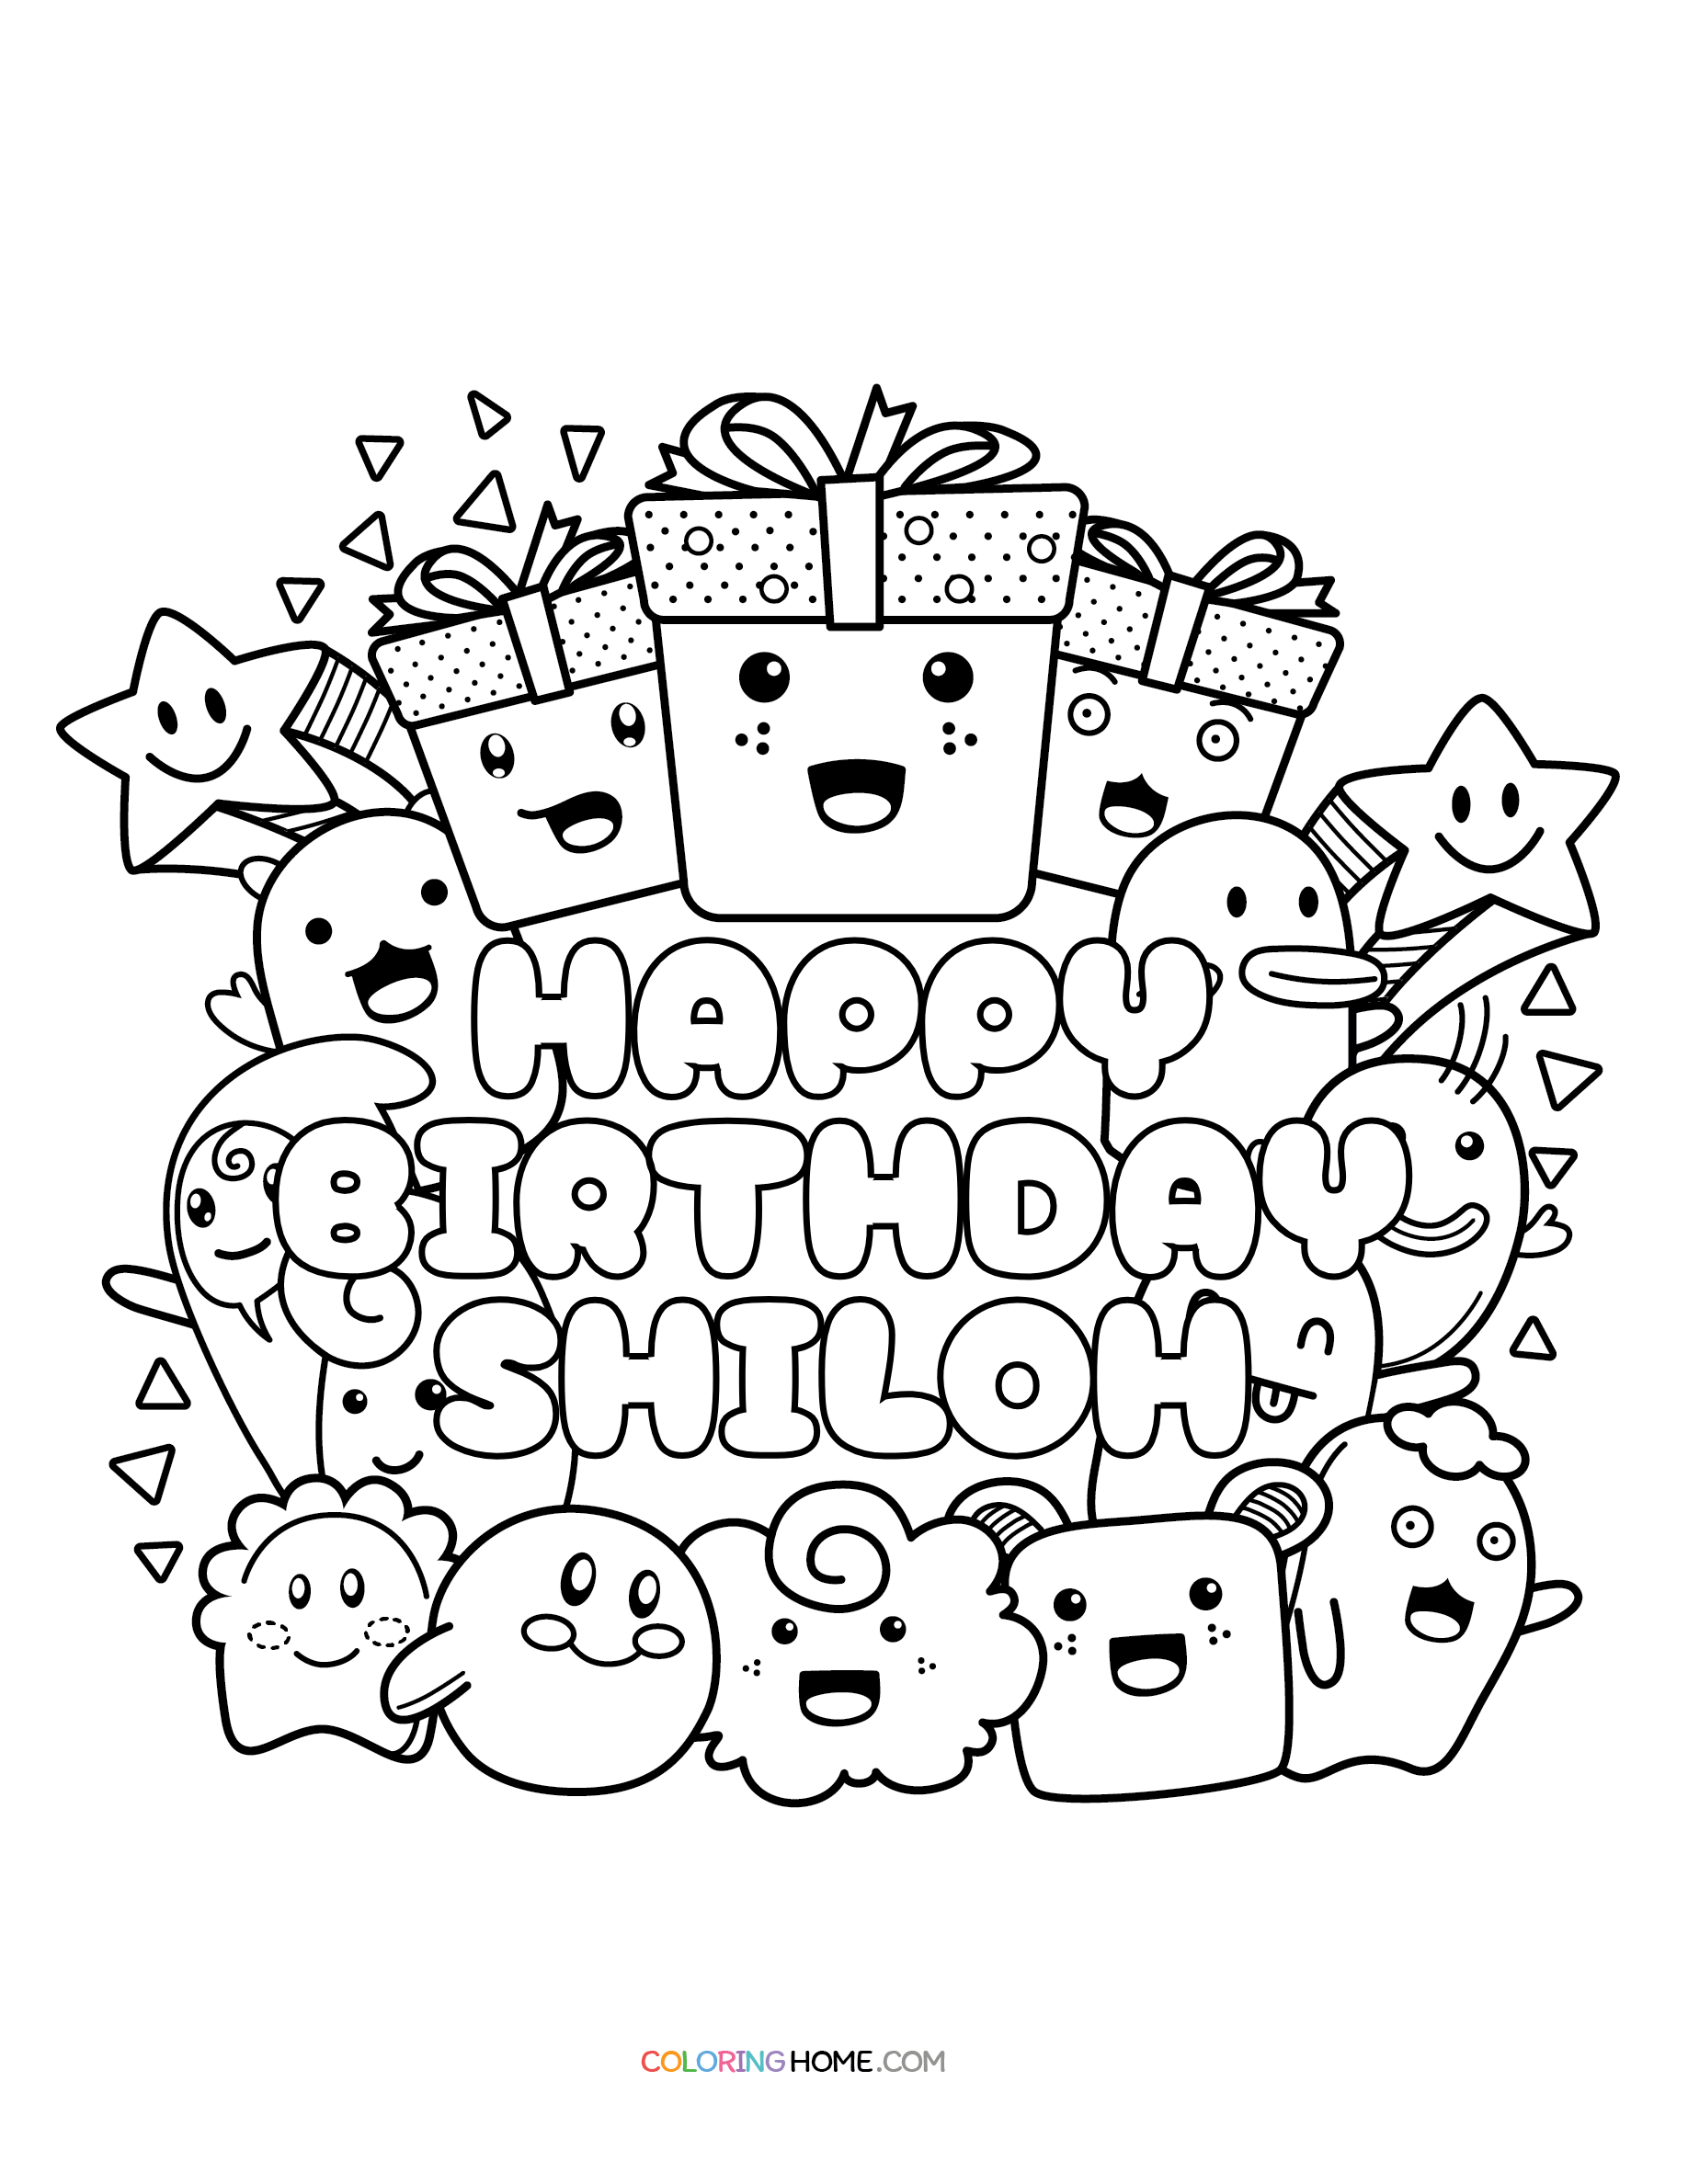 Happy Birthday Shiloh coloring page